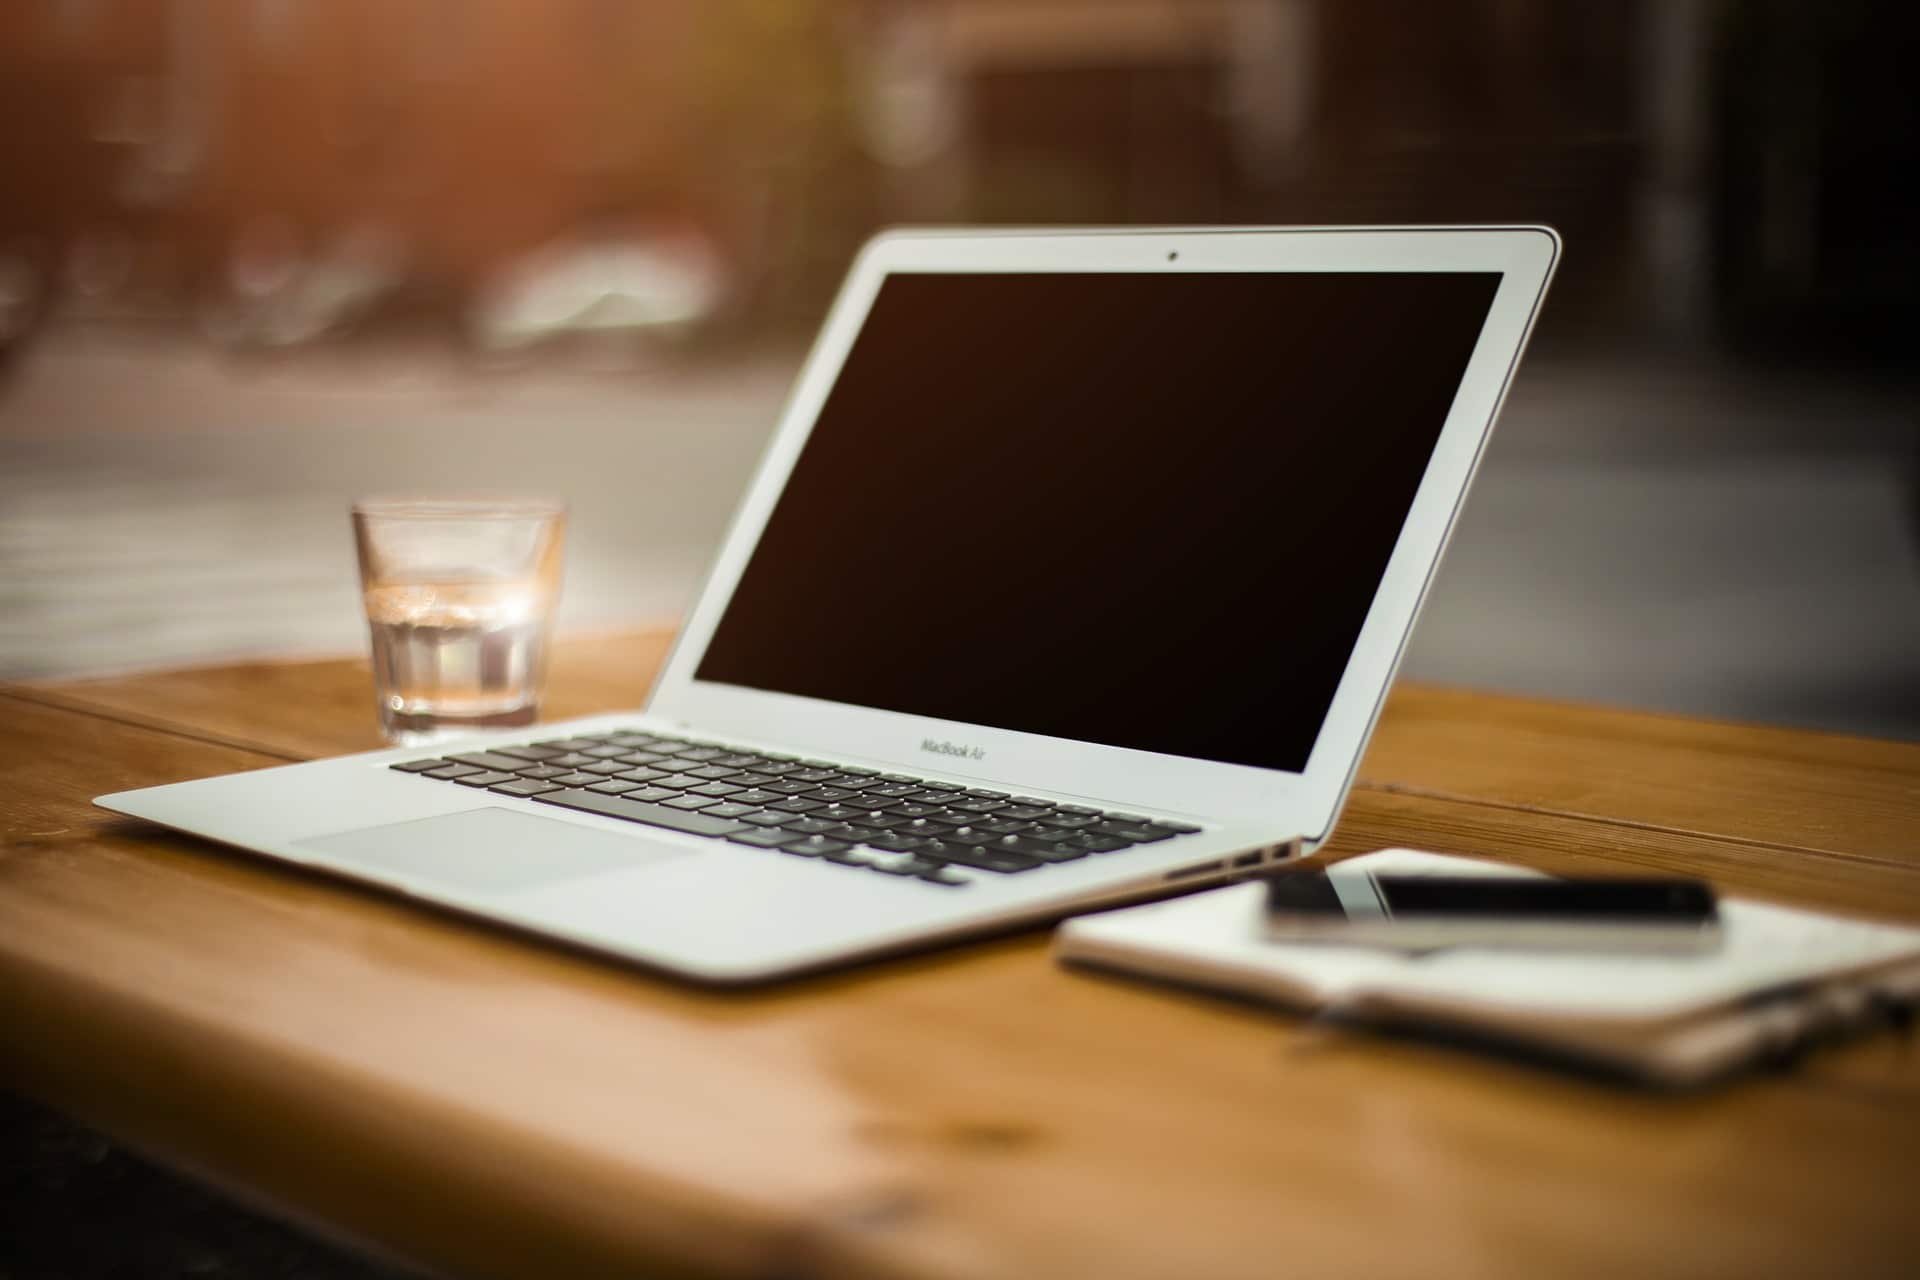 Photo of a laptop computer on a wooden table with a notepad and a glass of water.